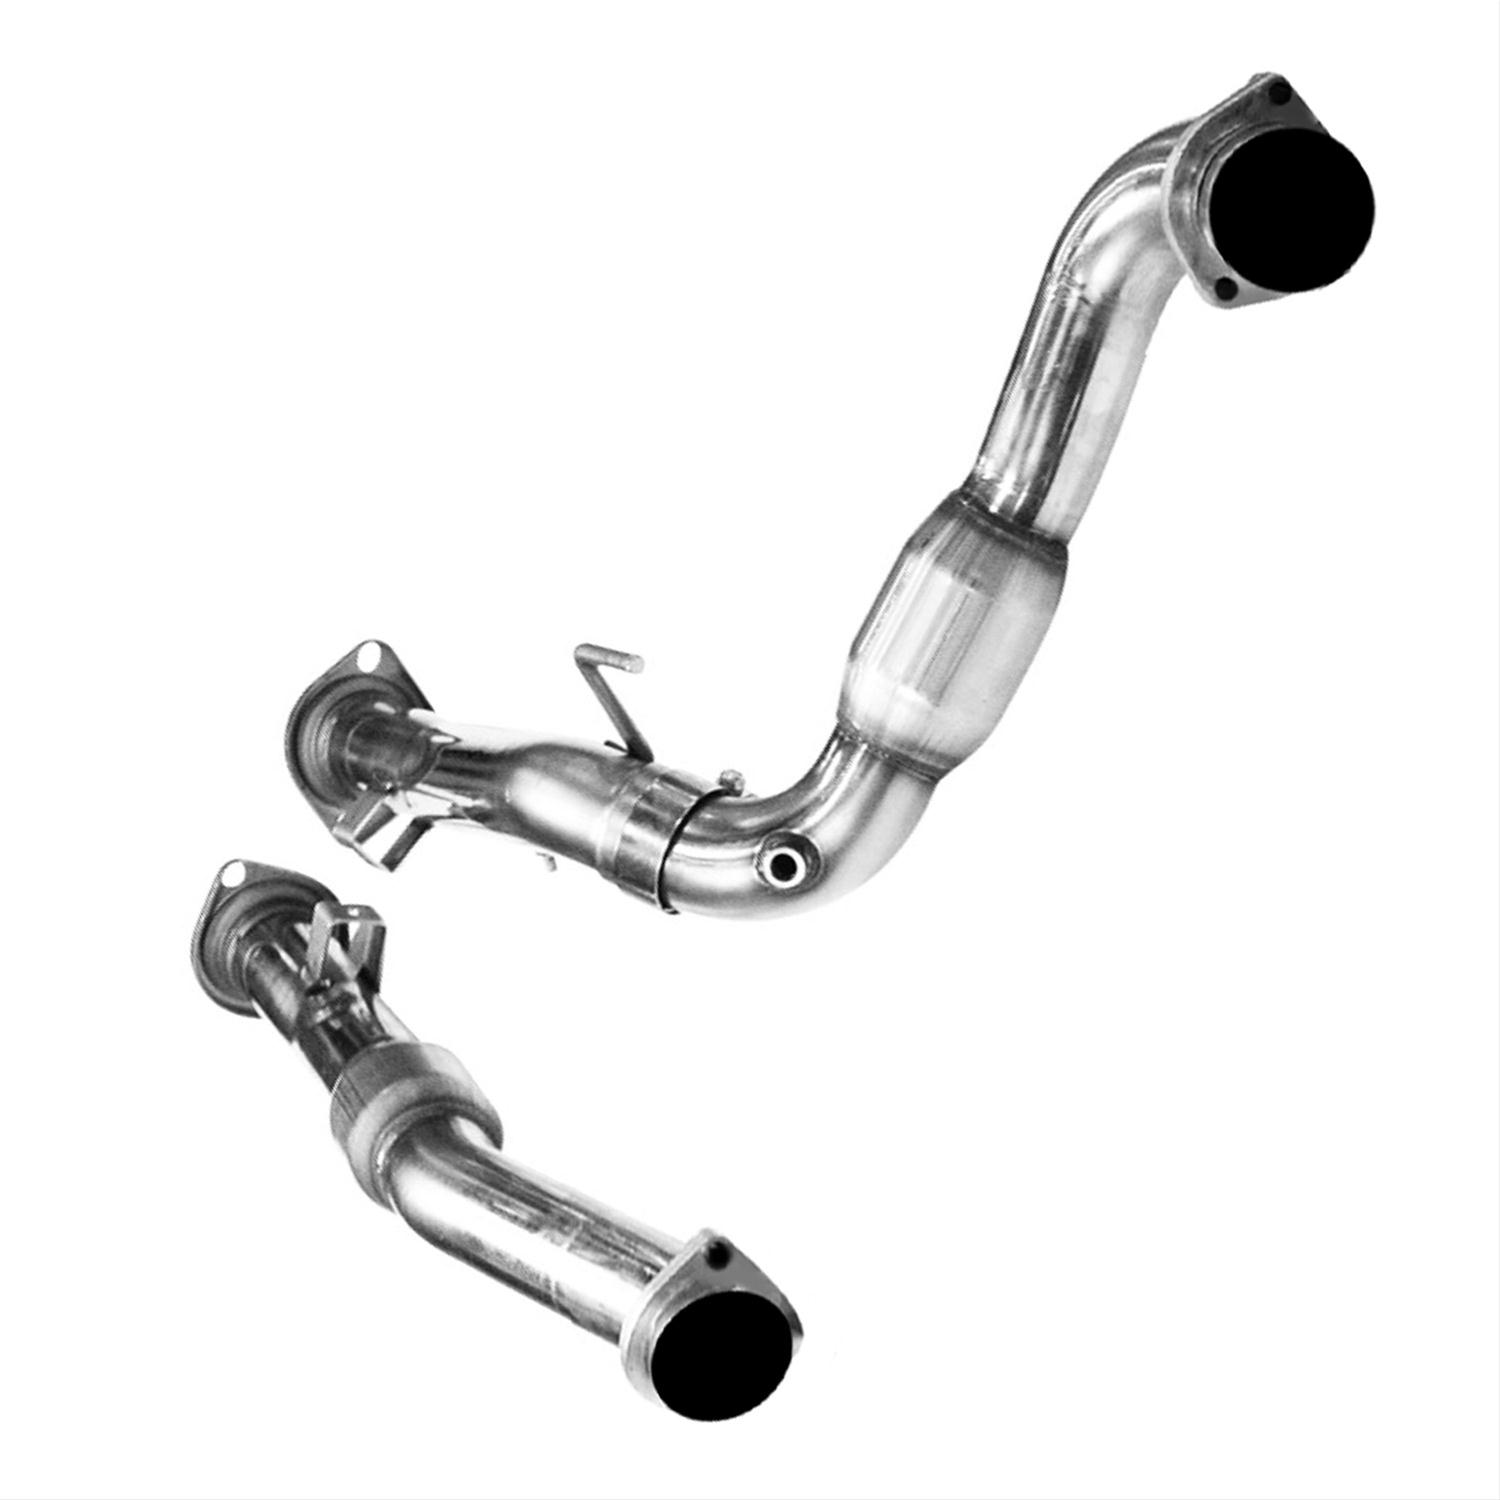 Kooks 2011+ Jeep Grand Cherokee 5.7L 3in x OEM SS Catted Connection Pipes